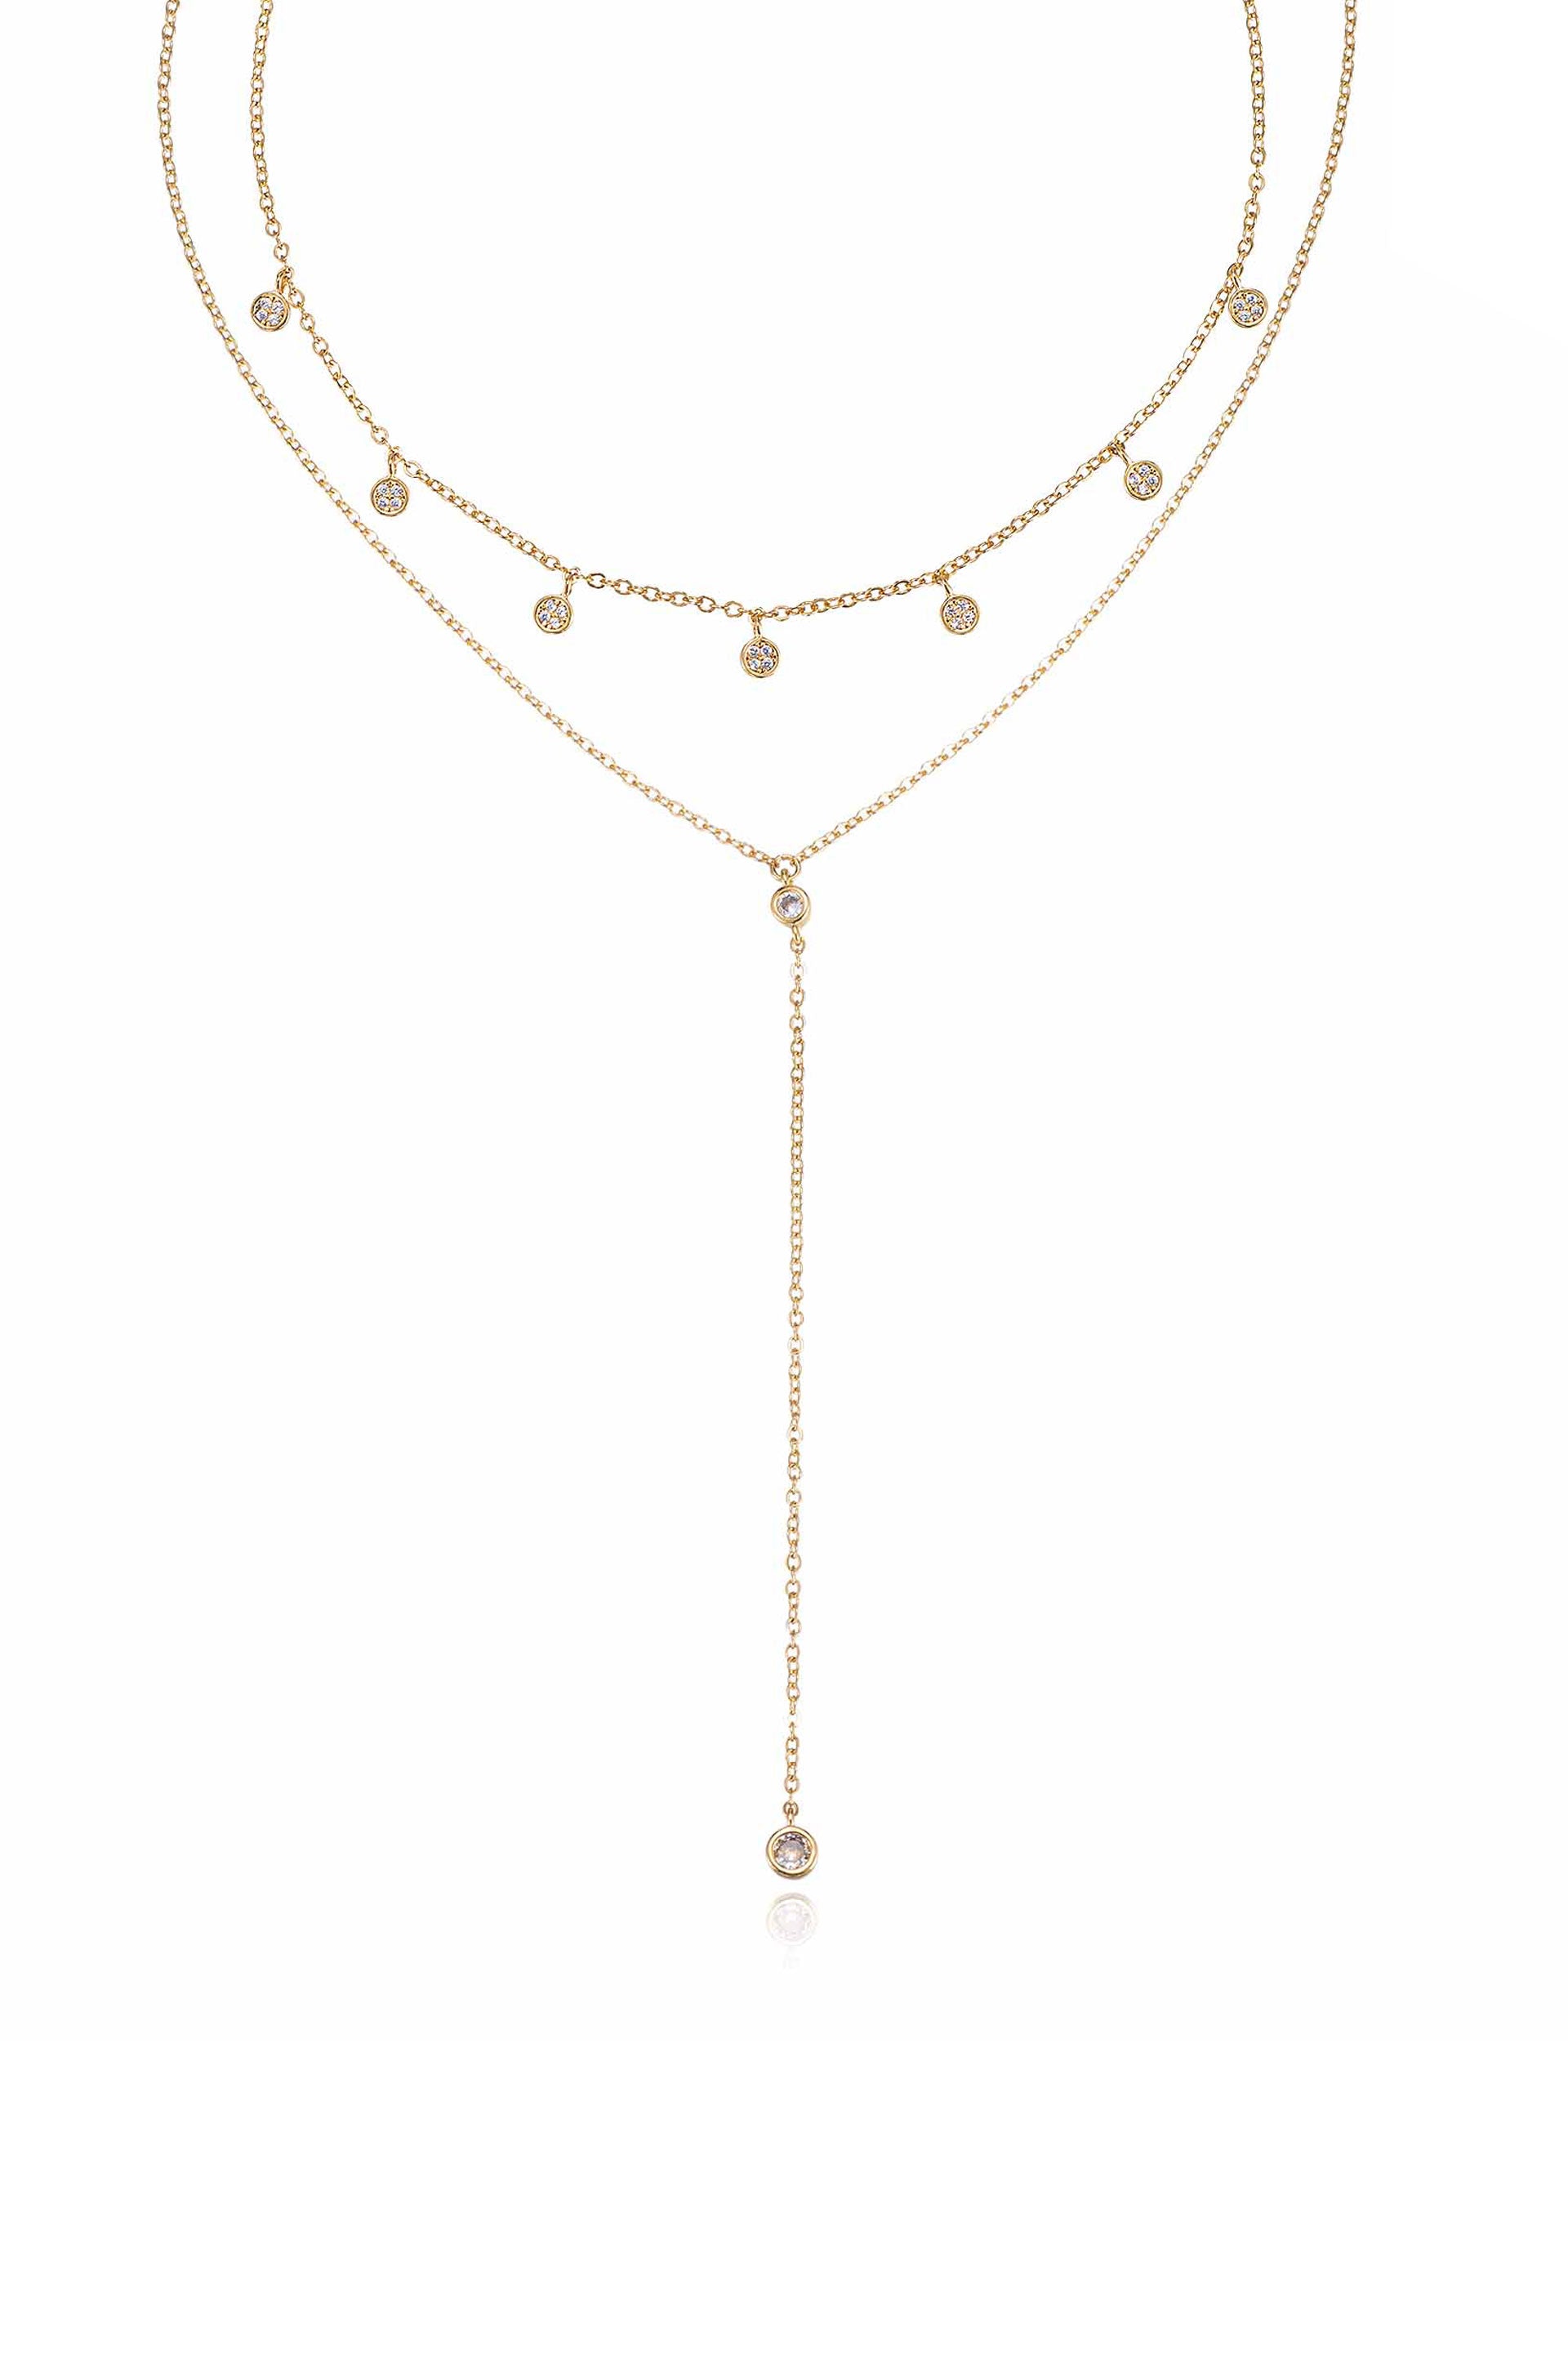 Simplistic Crystal Layered 18k Gold Plated Lariat Necklace Set on white